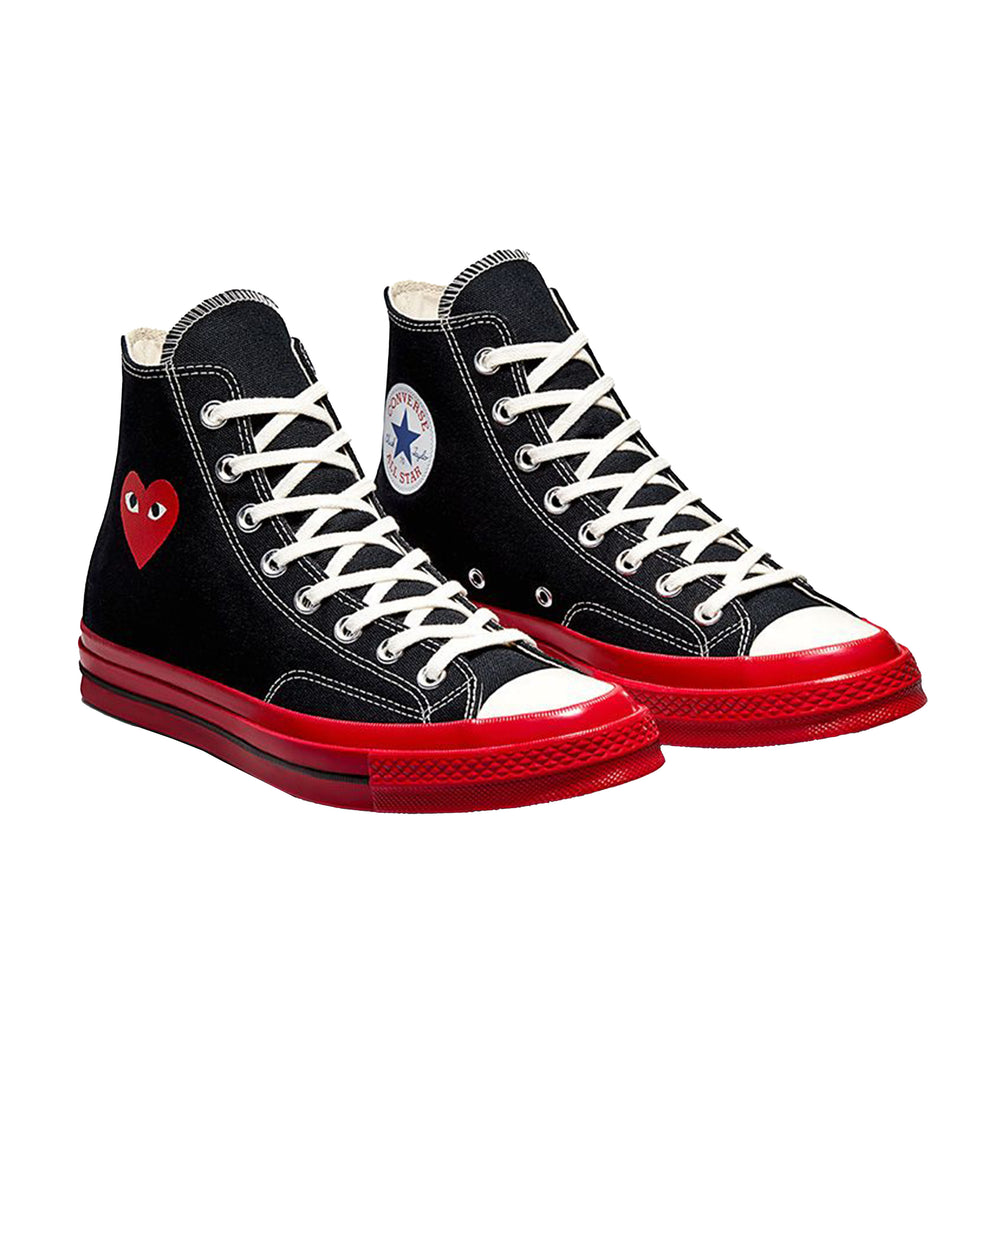 slank Dakraam Natura Comme Des Garcons X Converse Red Sole Chuck 70 High Top Black | STASHED